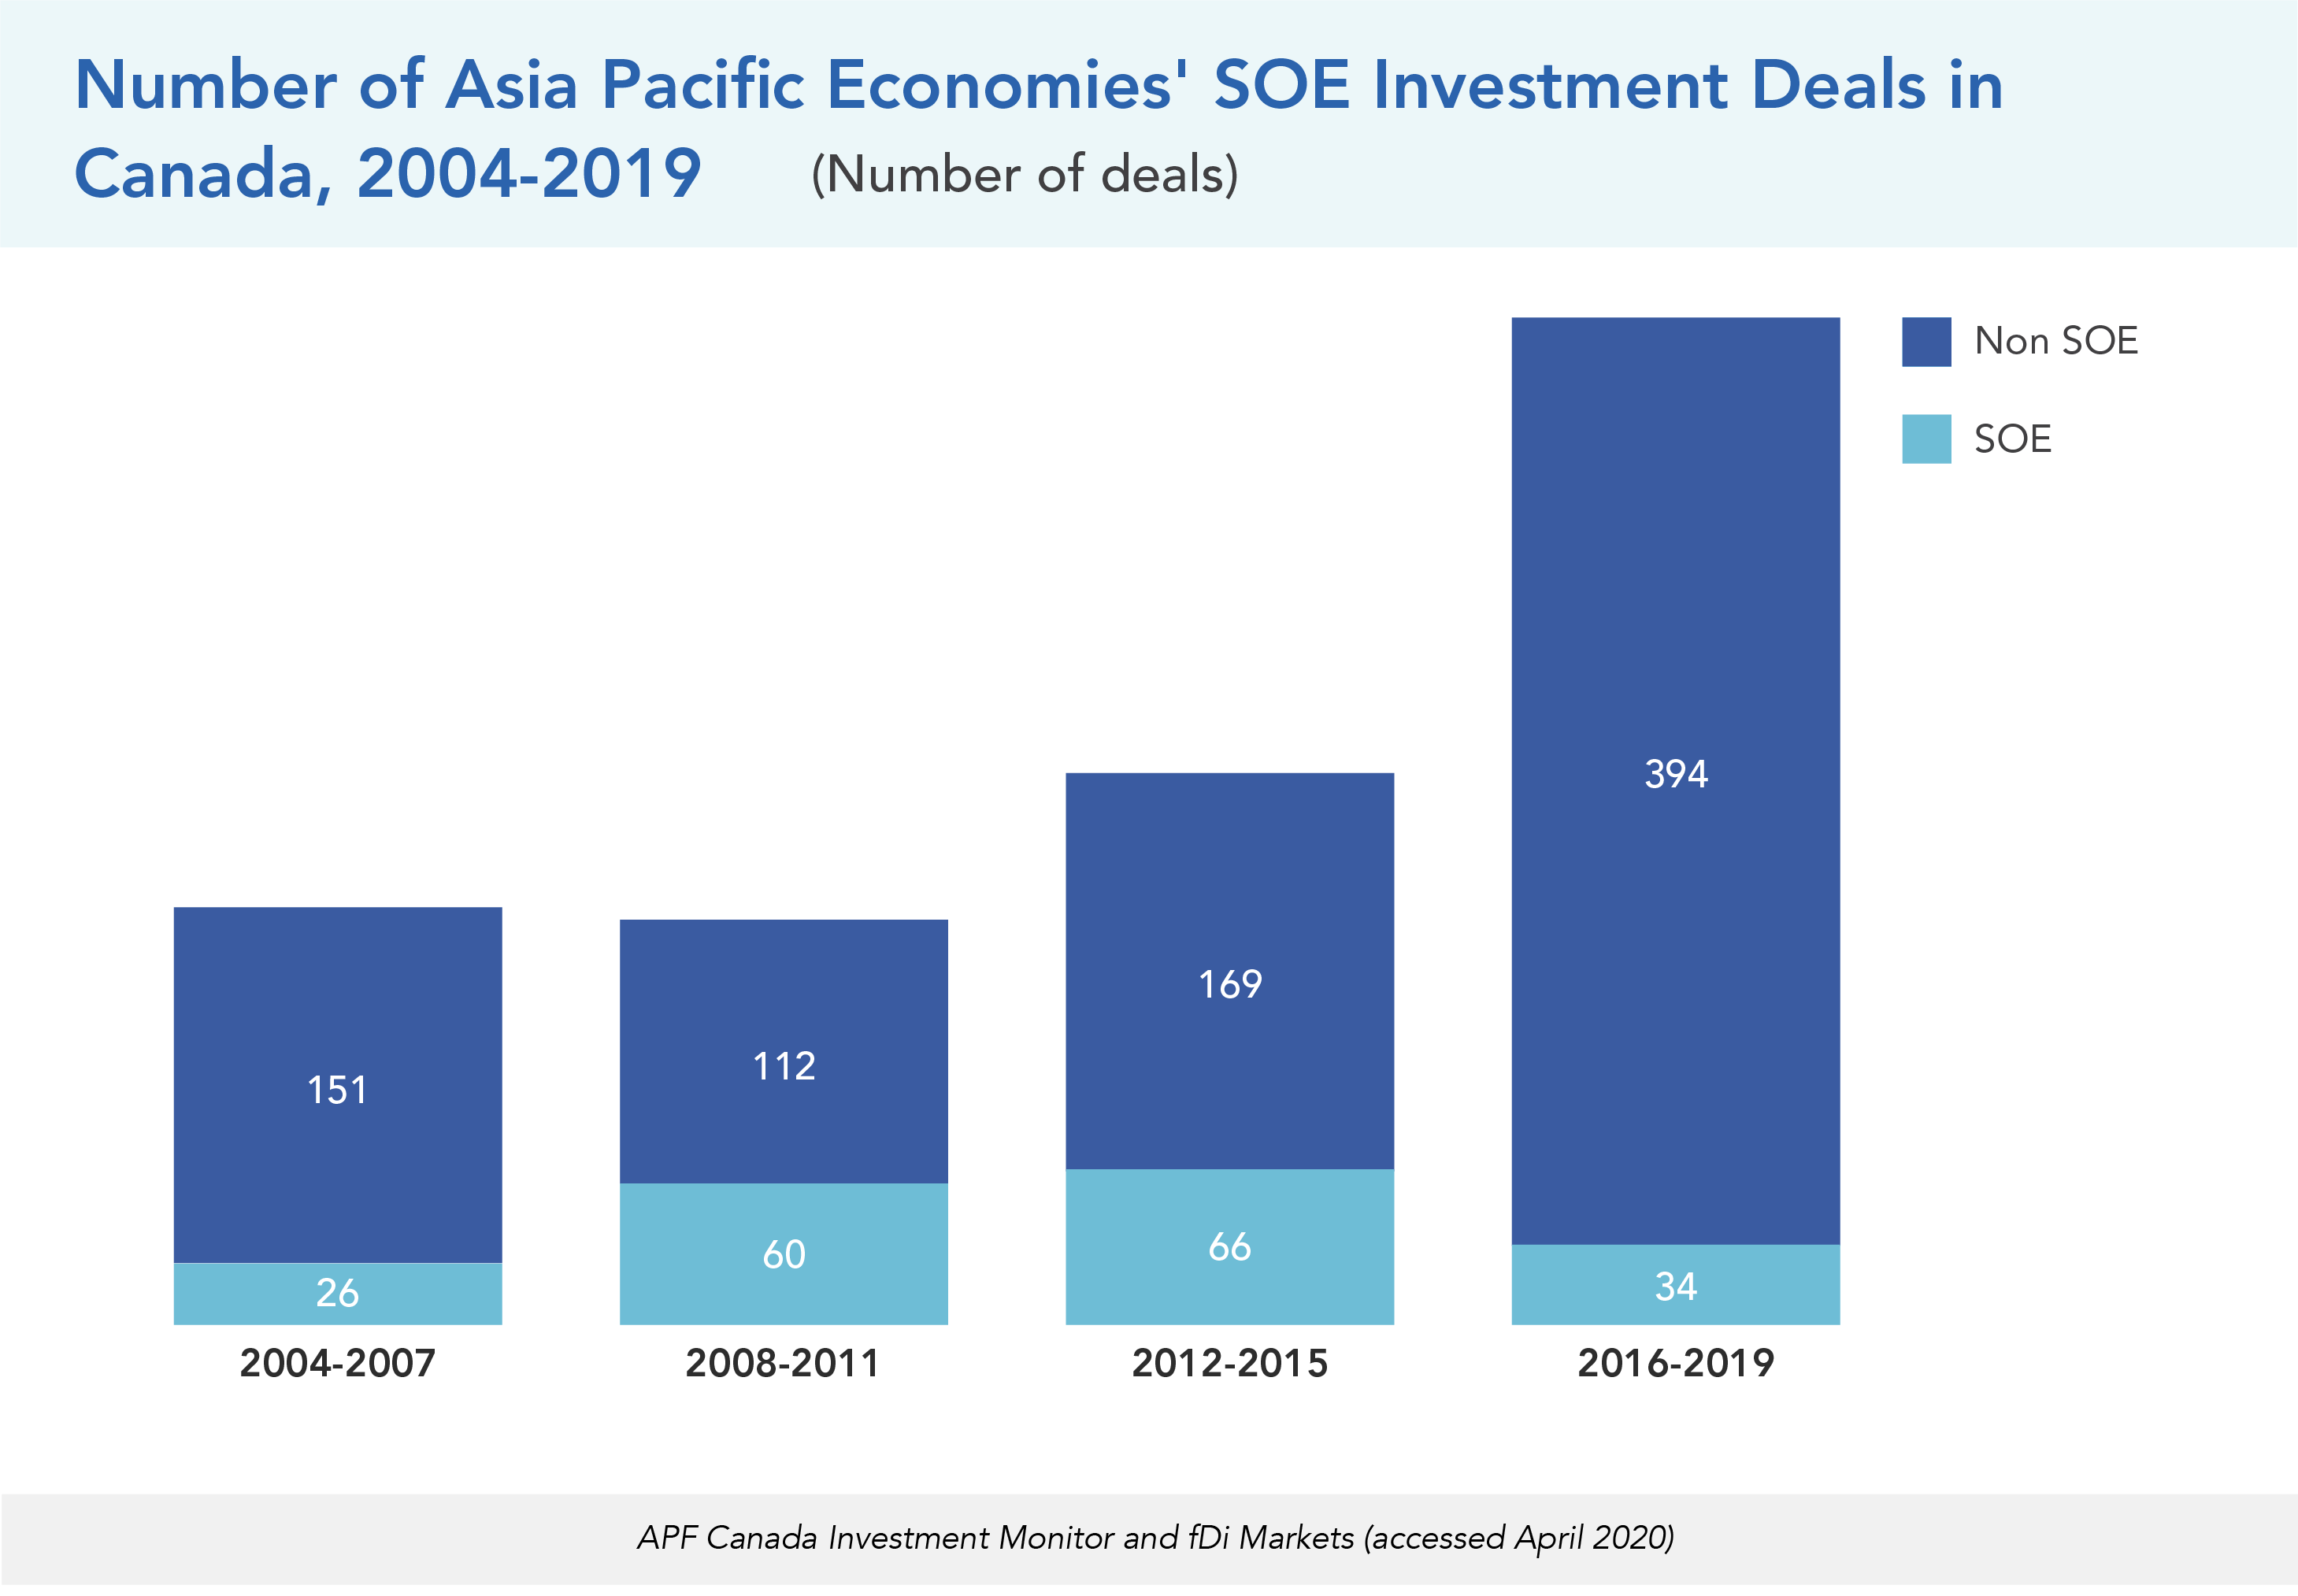 Number of Asia Pacific Economies' SOE Investment Deals in Canada, 2004-2019